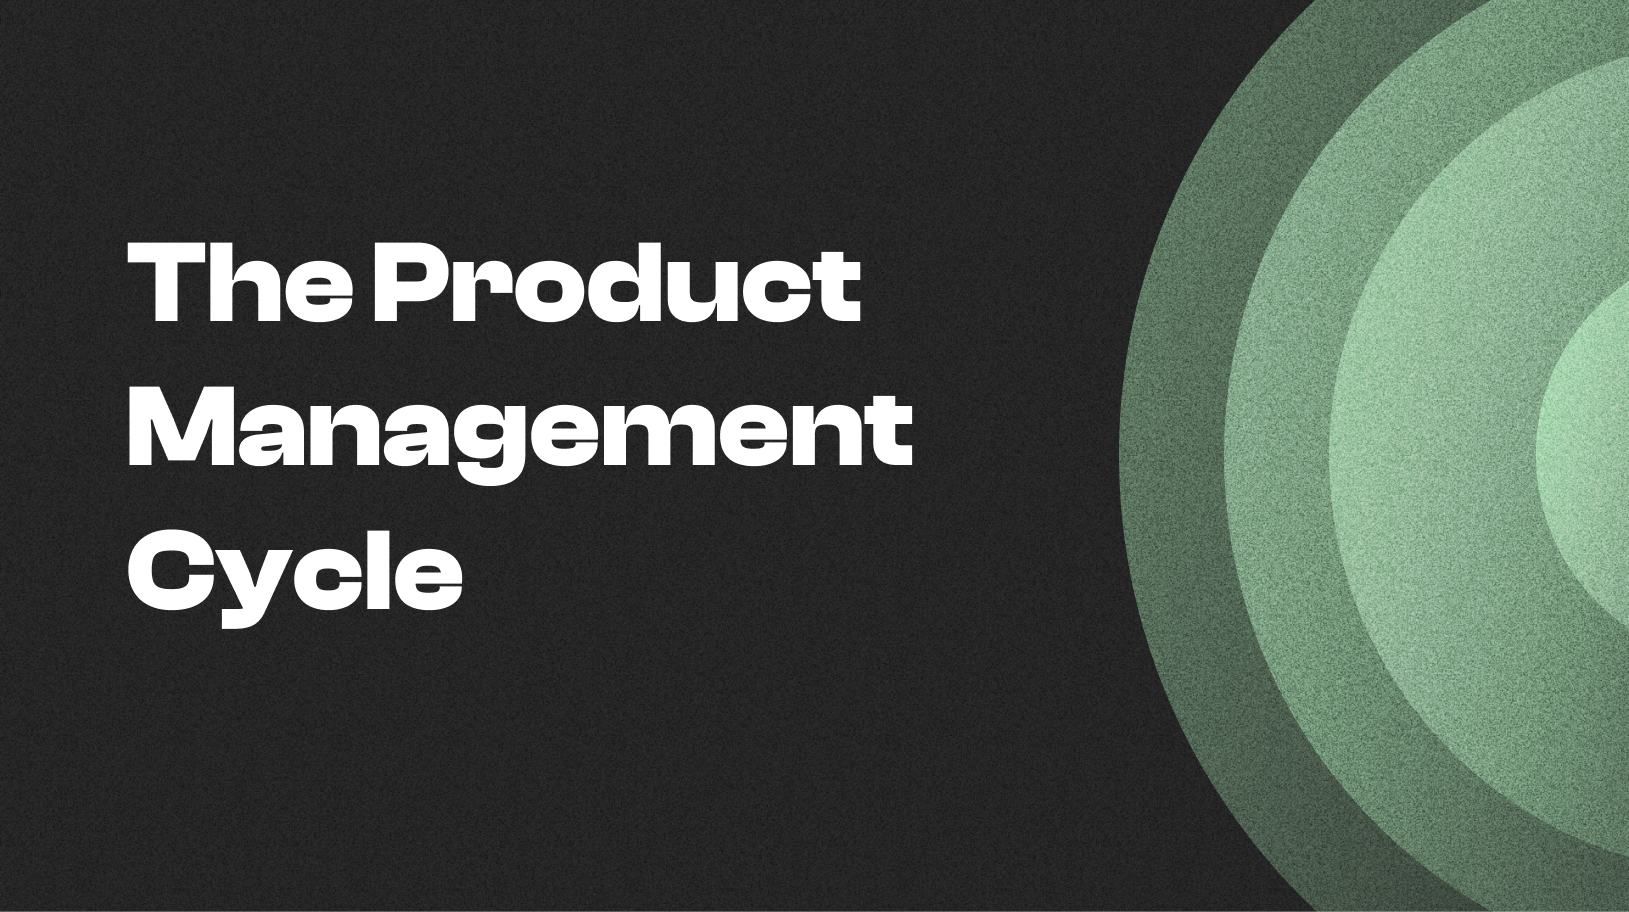 The Product Management Cycle